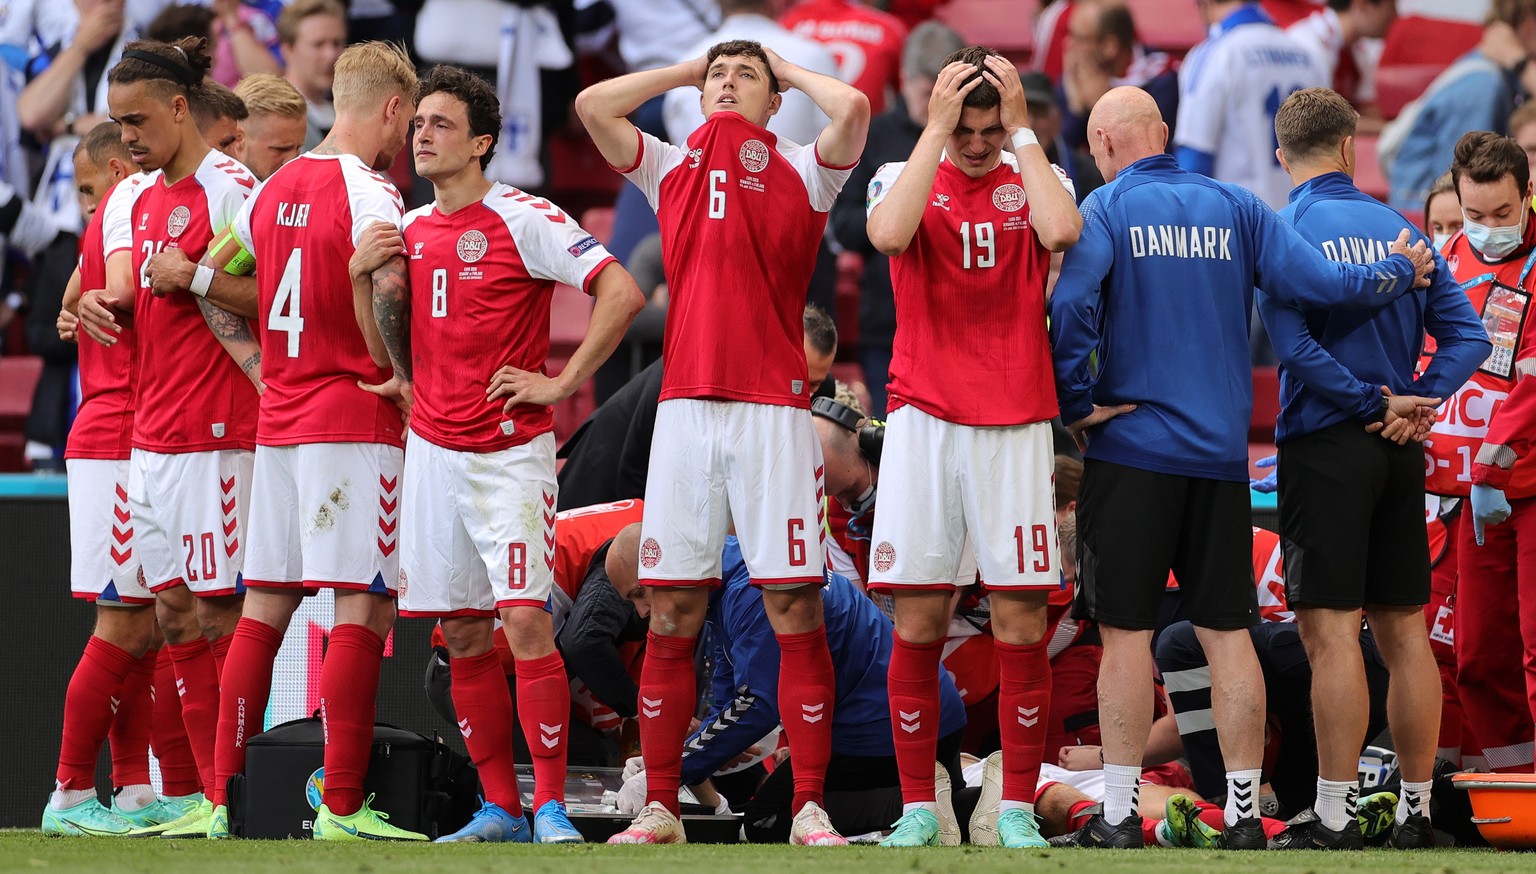 epa09266507 Players of Denmark react while their teammate Christian Eriksen receives medical treatment during the UEFA EURO 2020 group B preliminary round soccer match between Denmark and Finland in C ...